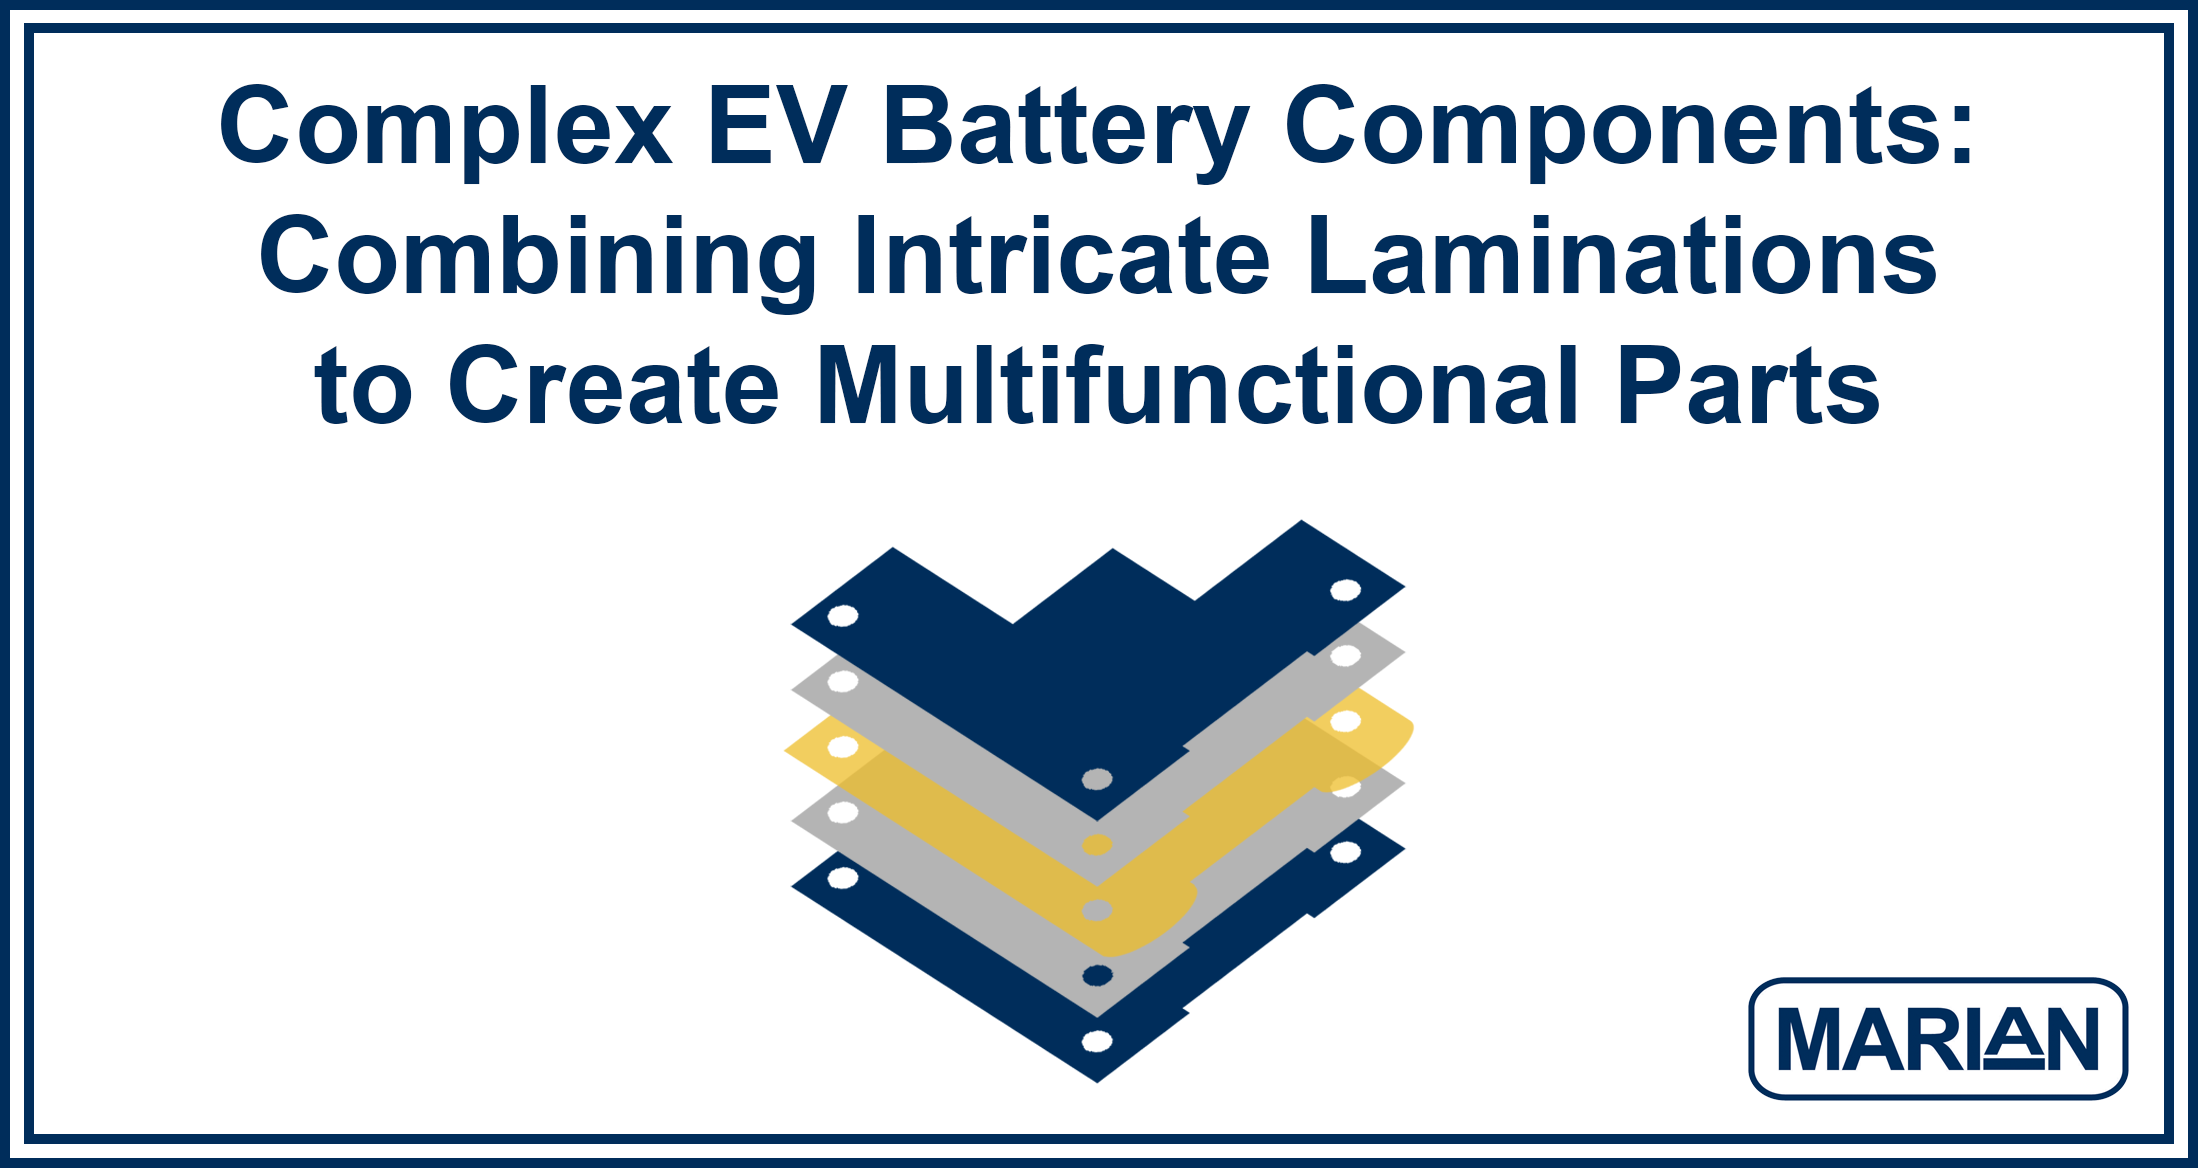 Complex EV Battery Components: Combining Intricate Laminations to Create Multifunctional Parts